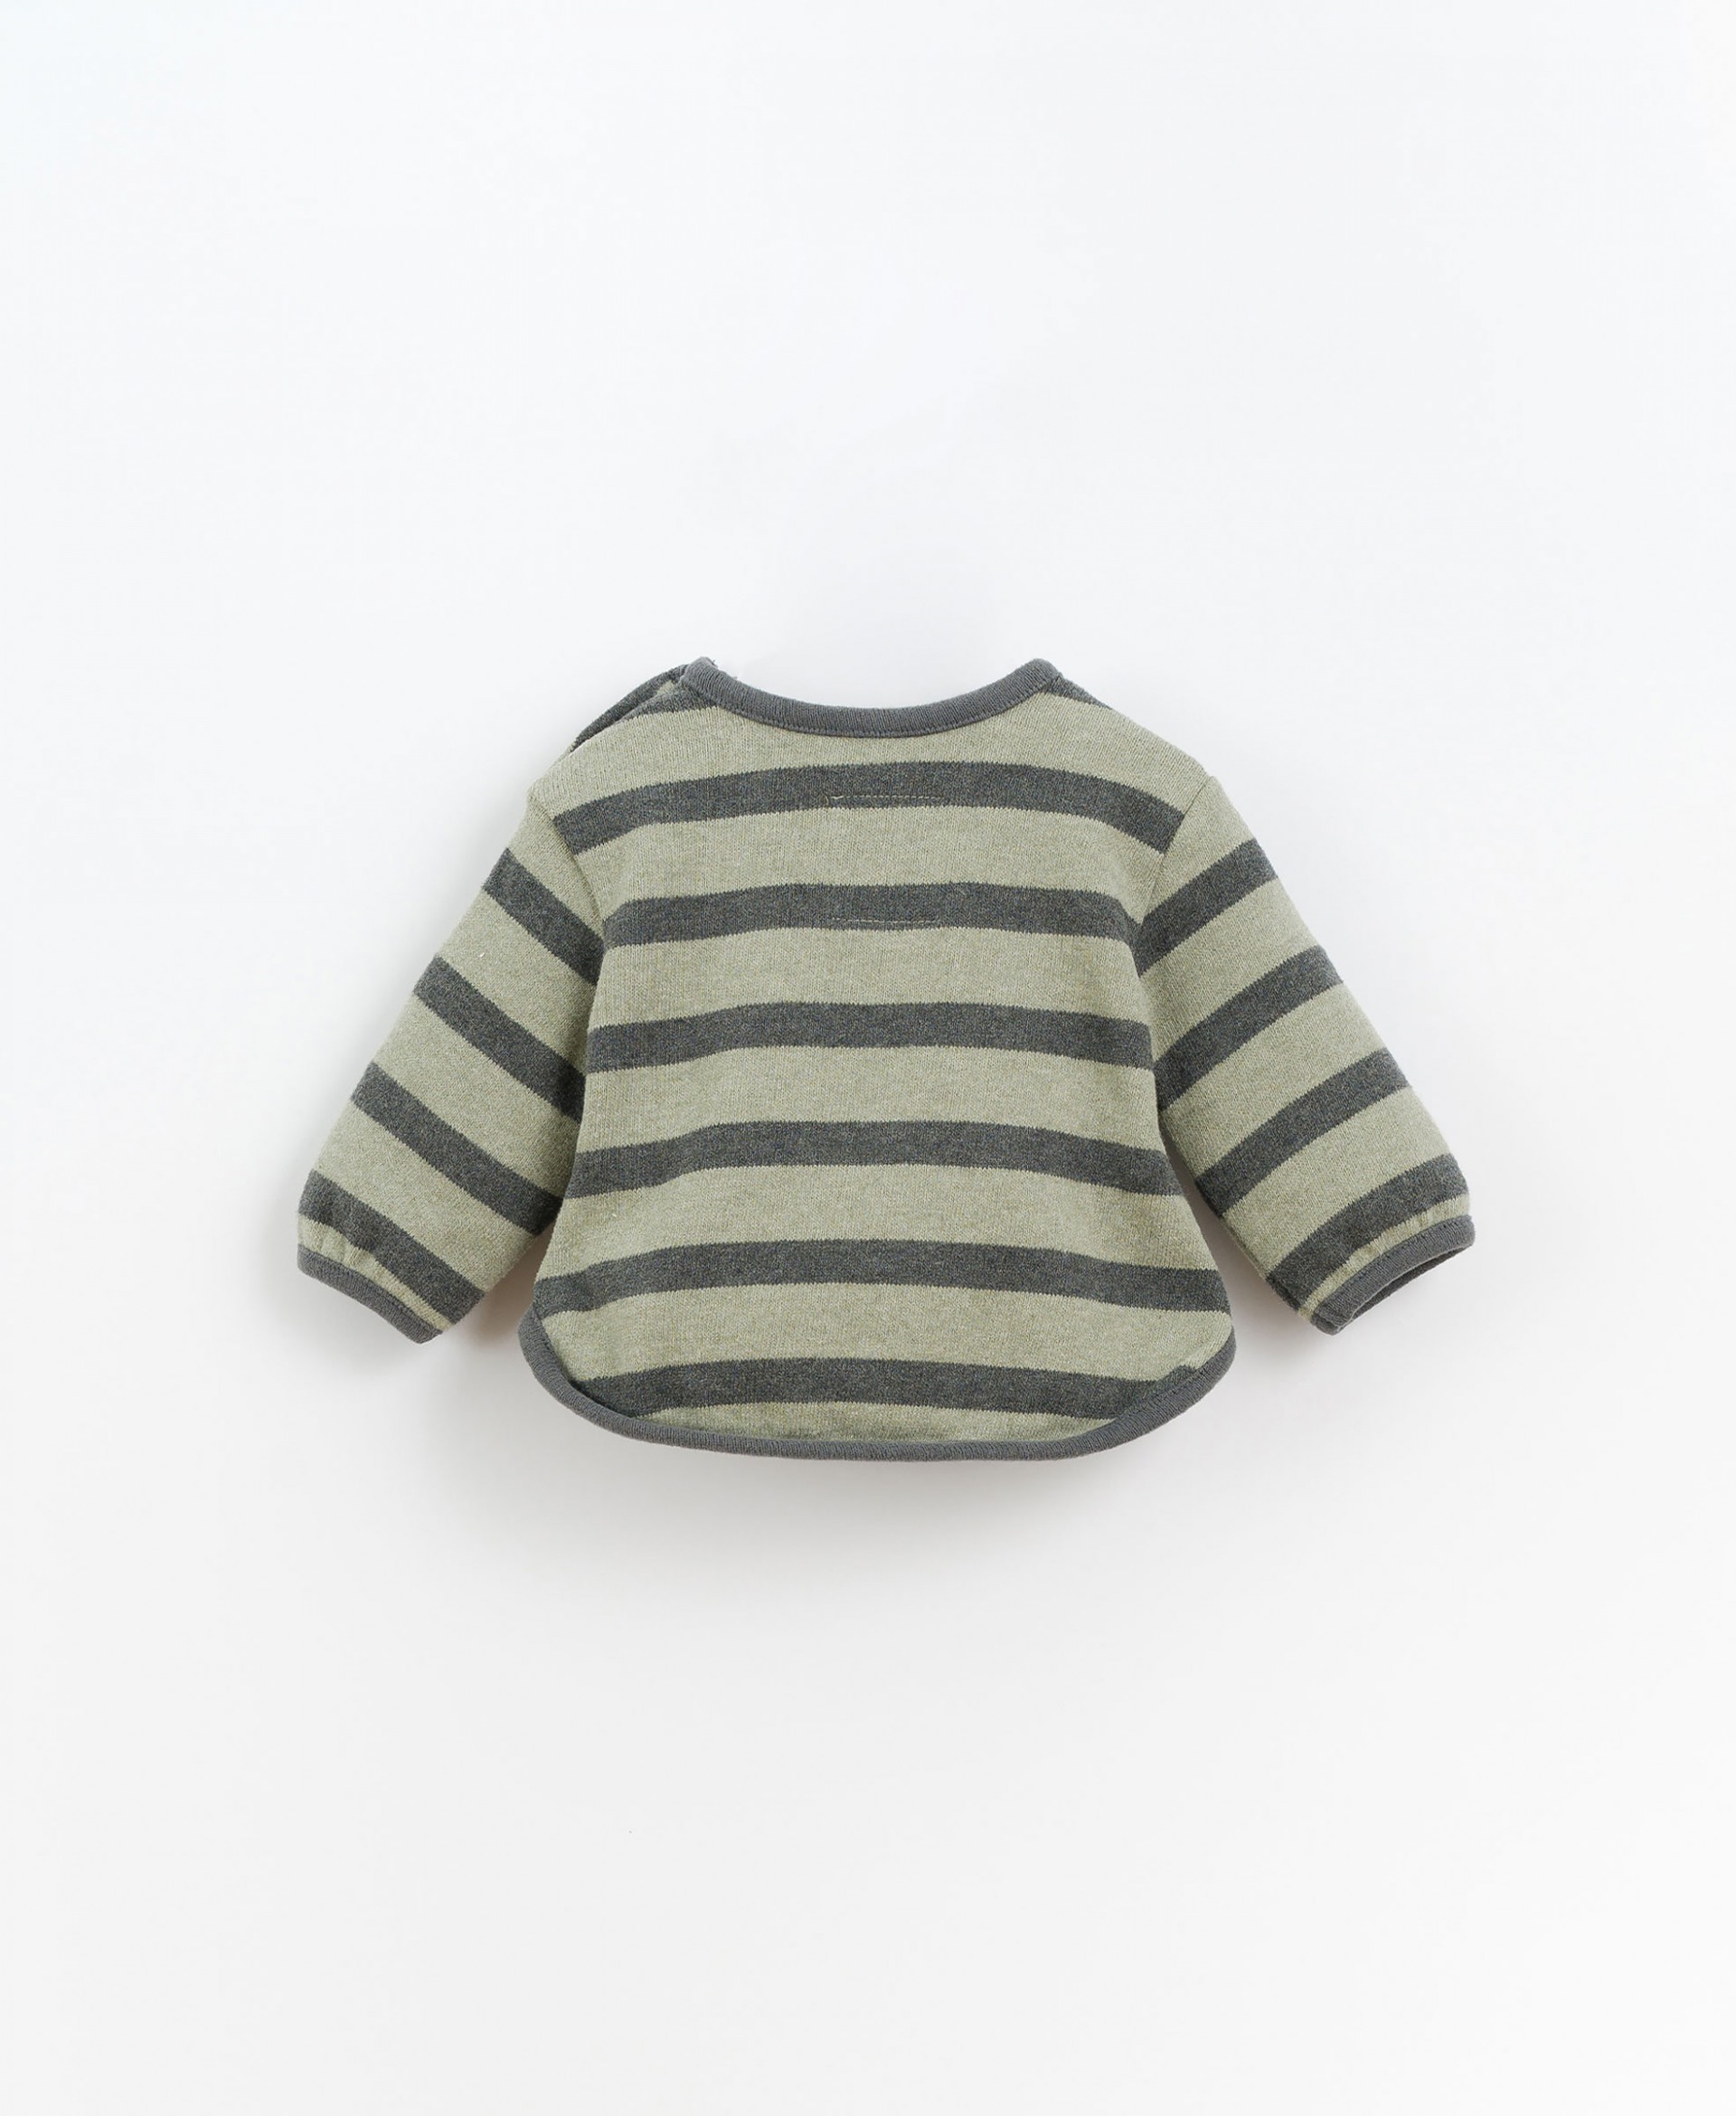 Woven striped jersey | Culinary